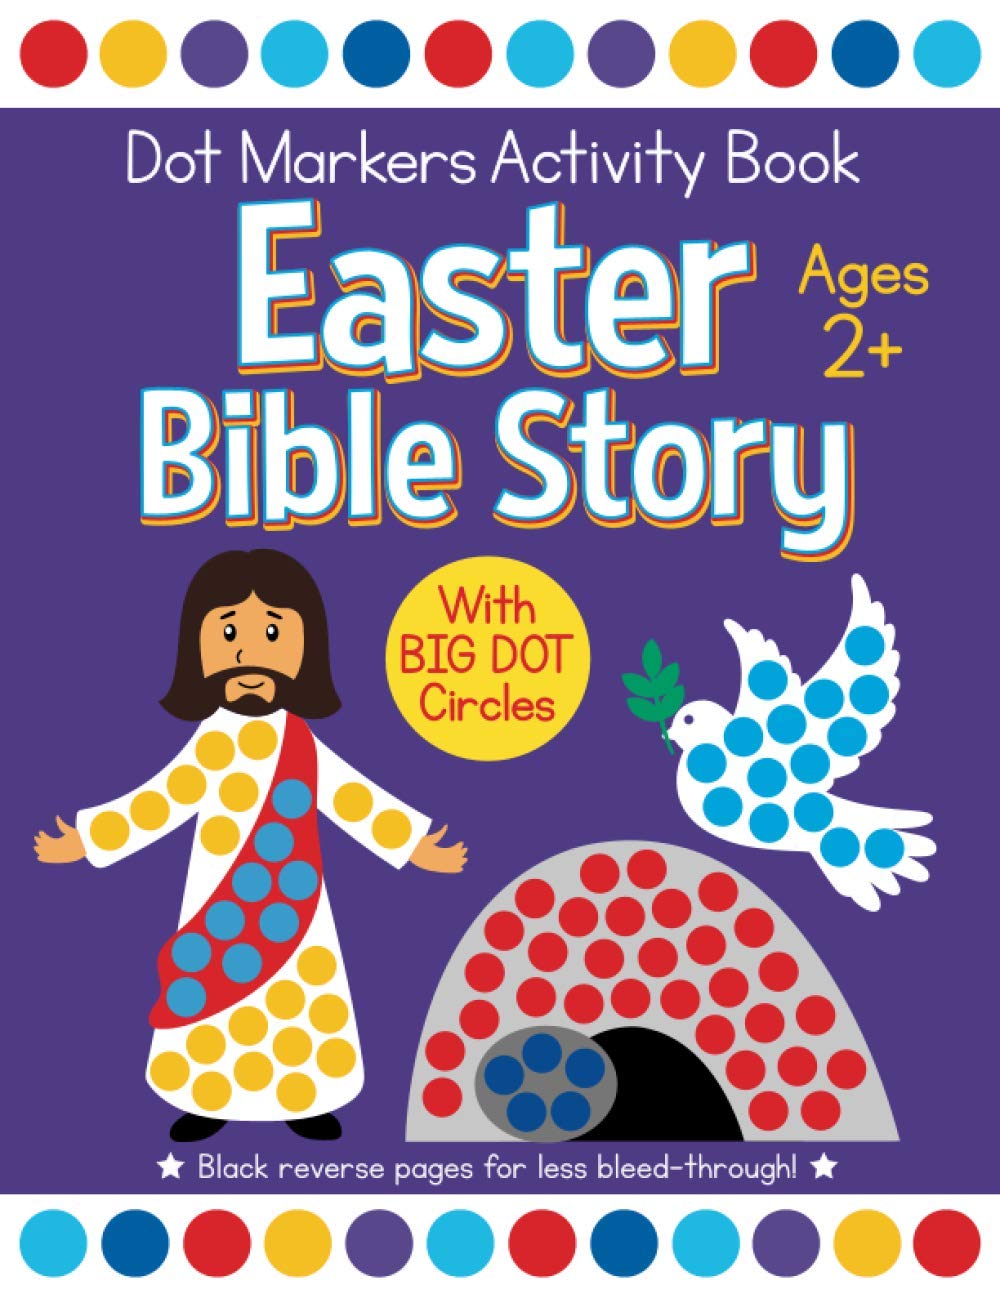 Easter Bible Story Dot Markers Activity Book Ages 2+: Easy Big Dots for Toddler and Preschool Kids Paint Dauber Coloring